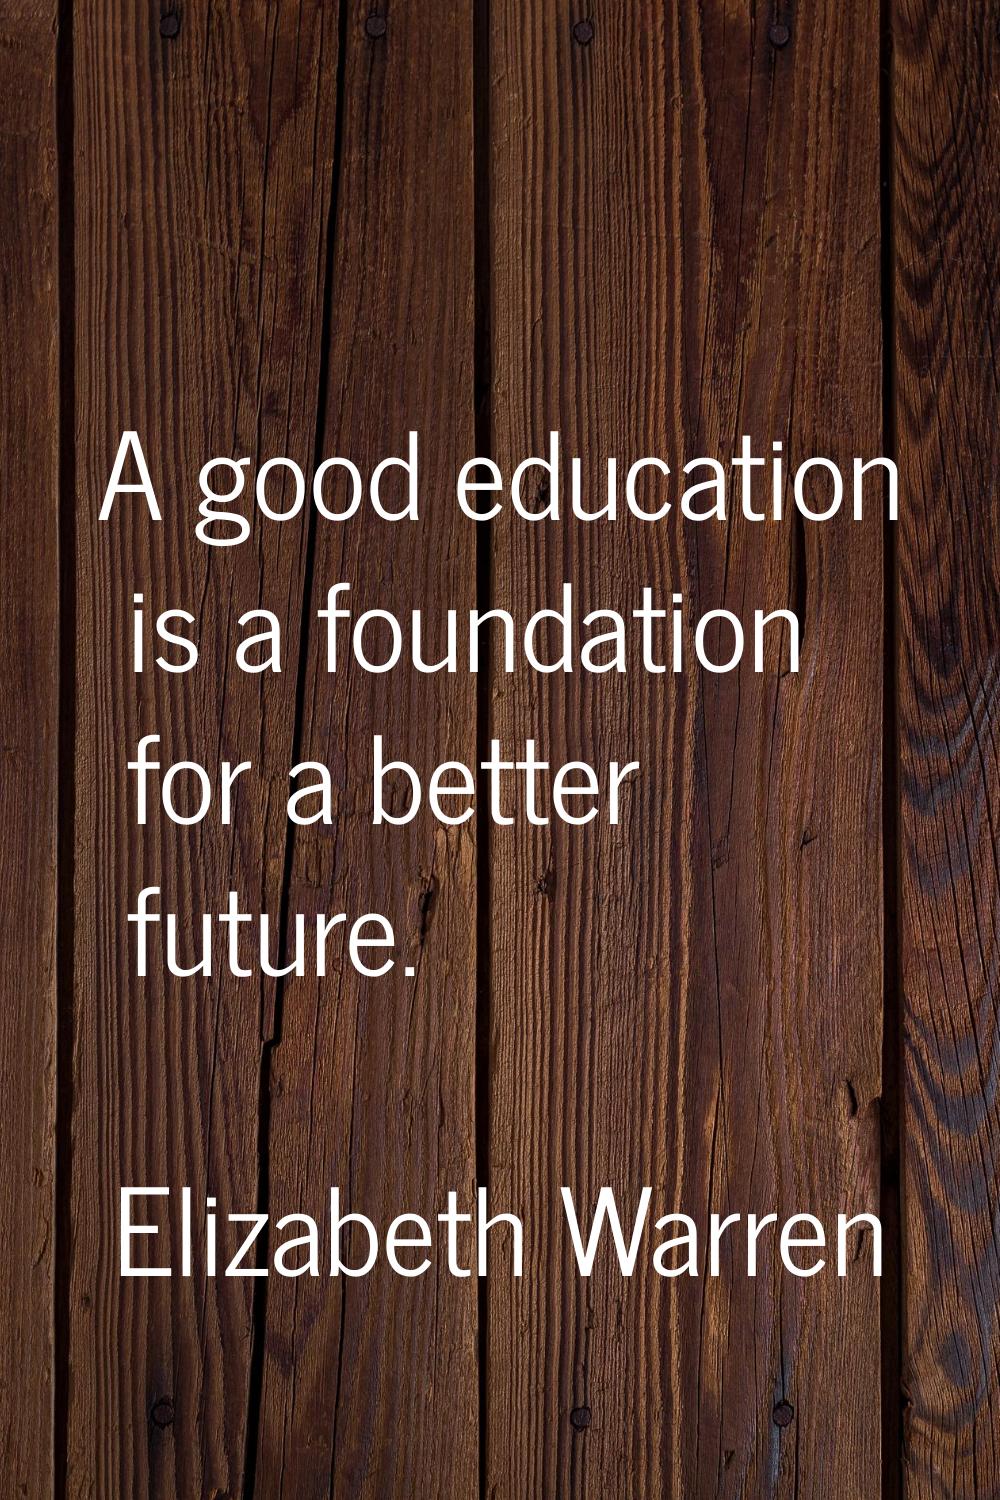 A good education is a foundation for a better future.